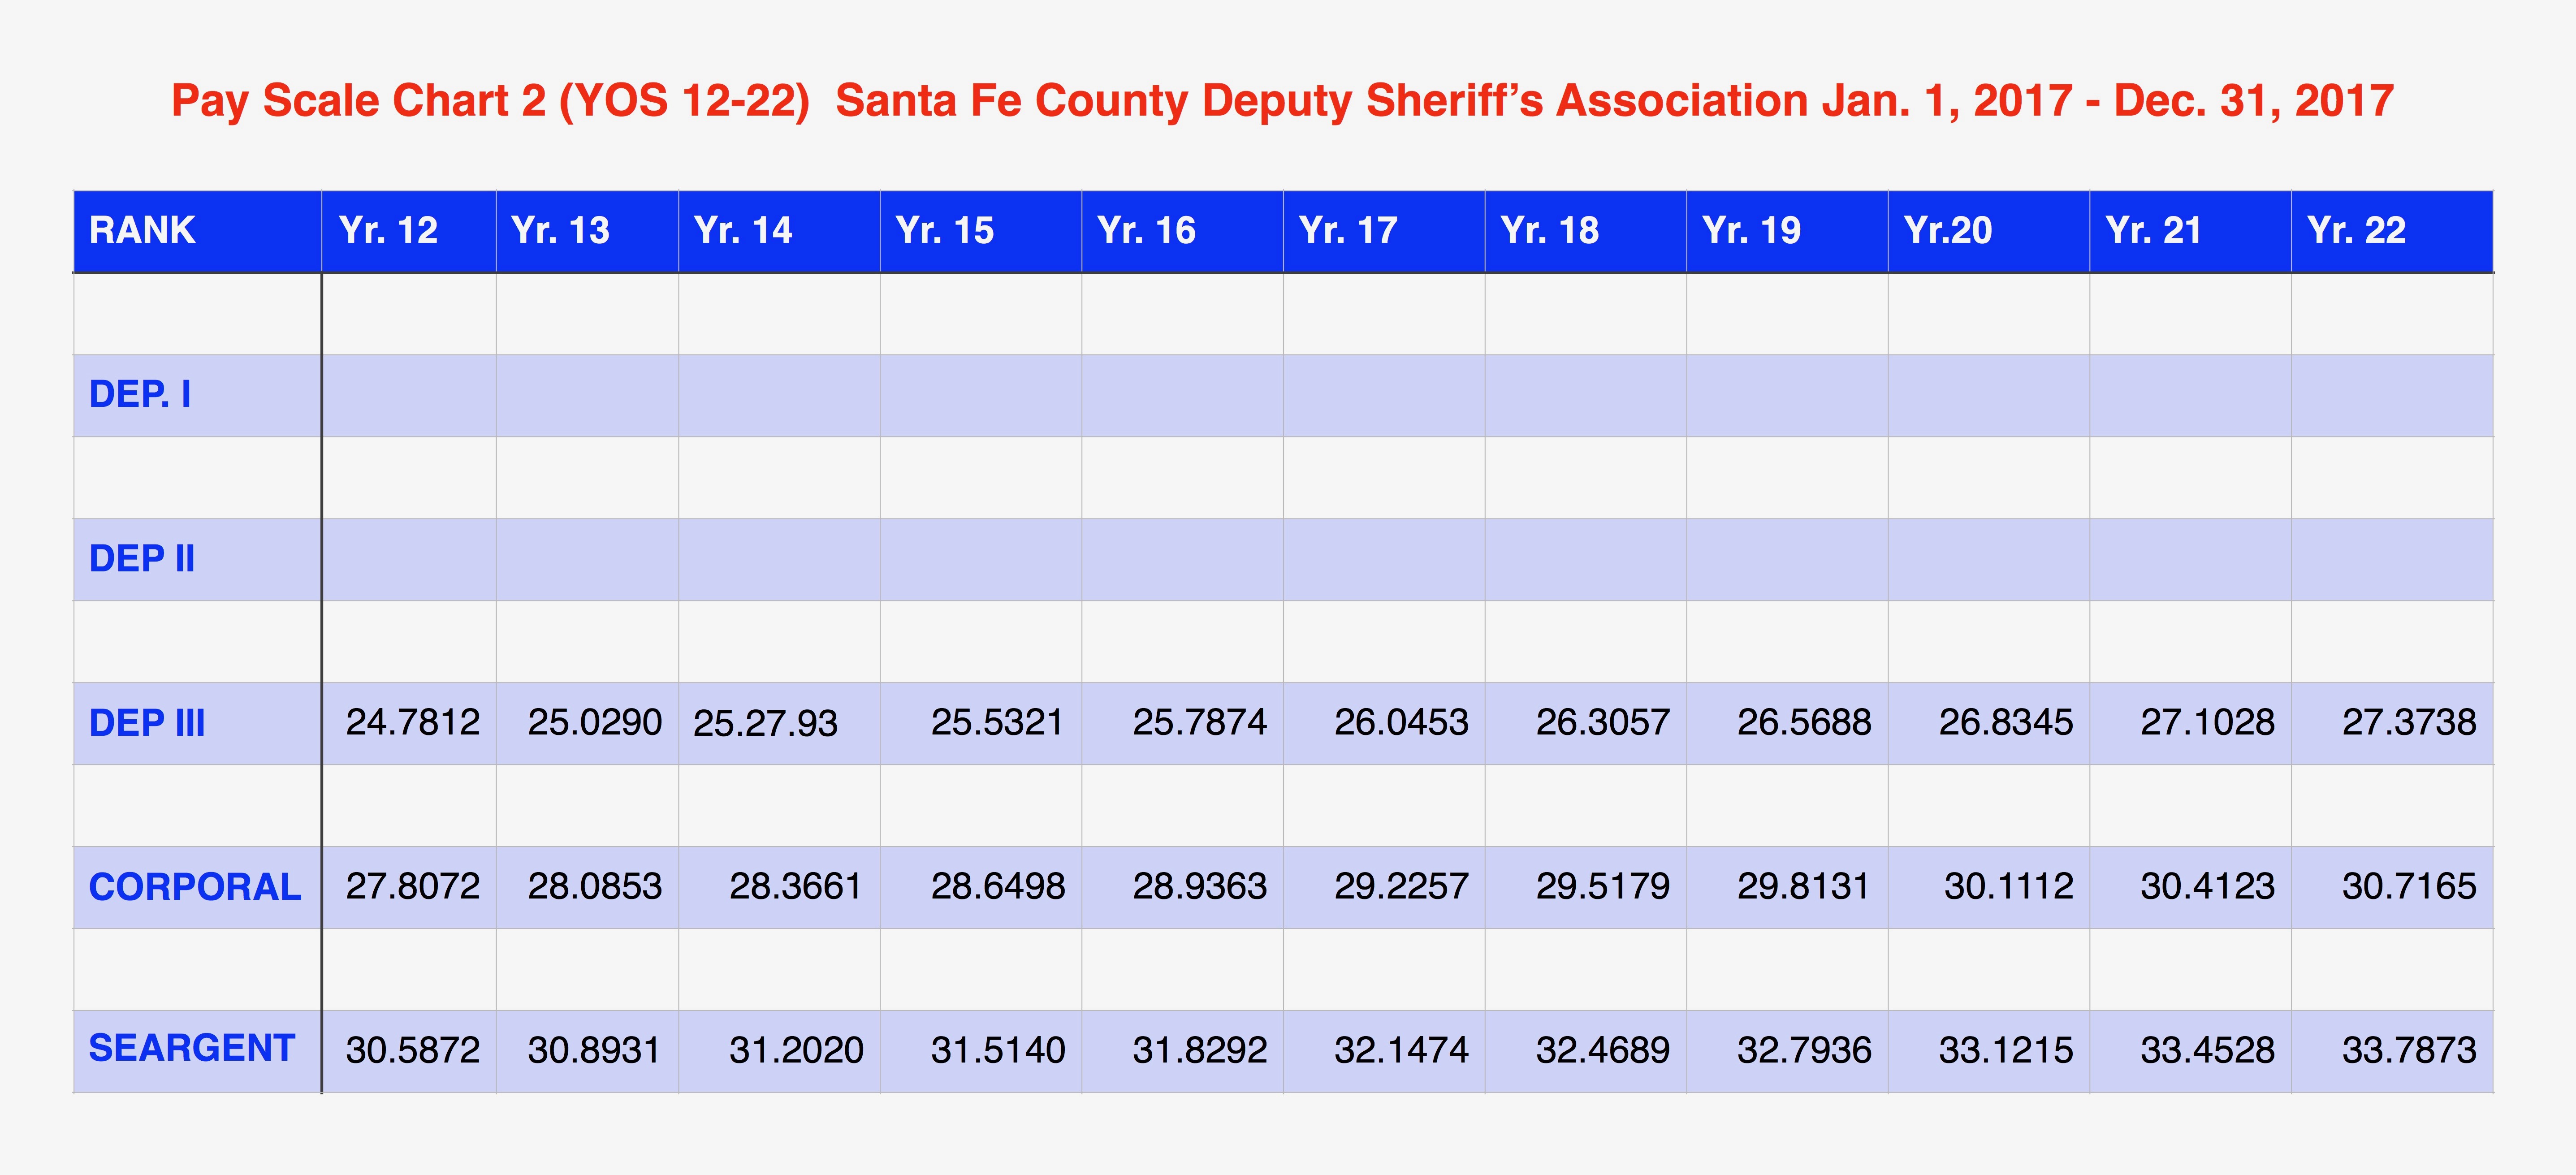 What is the average monthly salary for a sheriff?